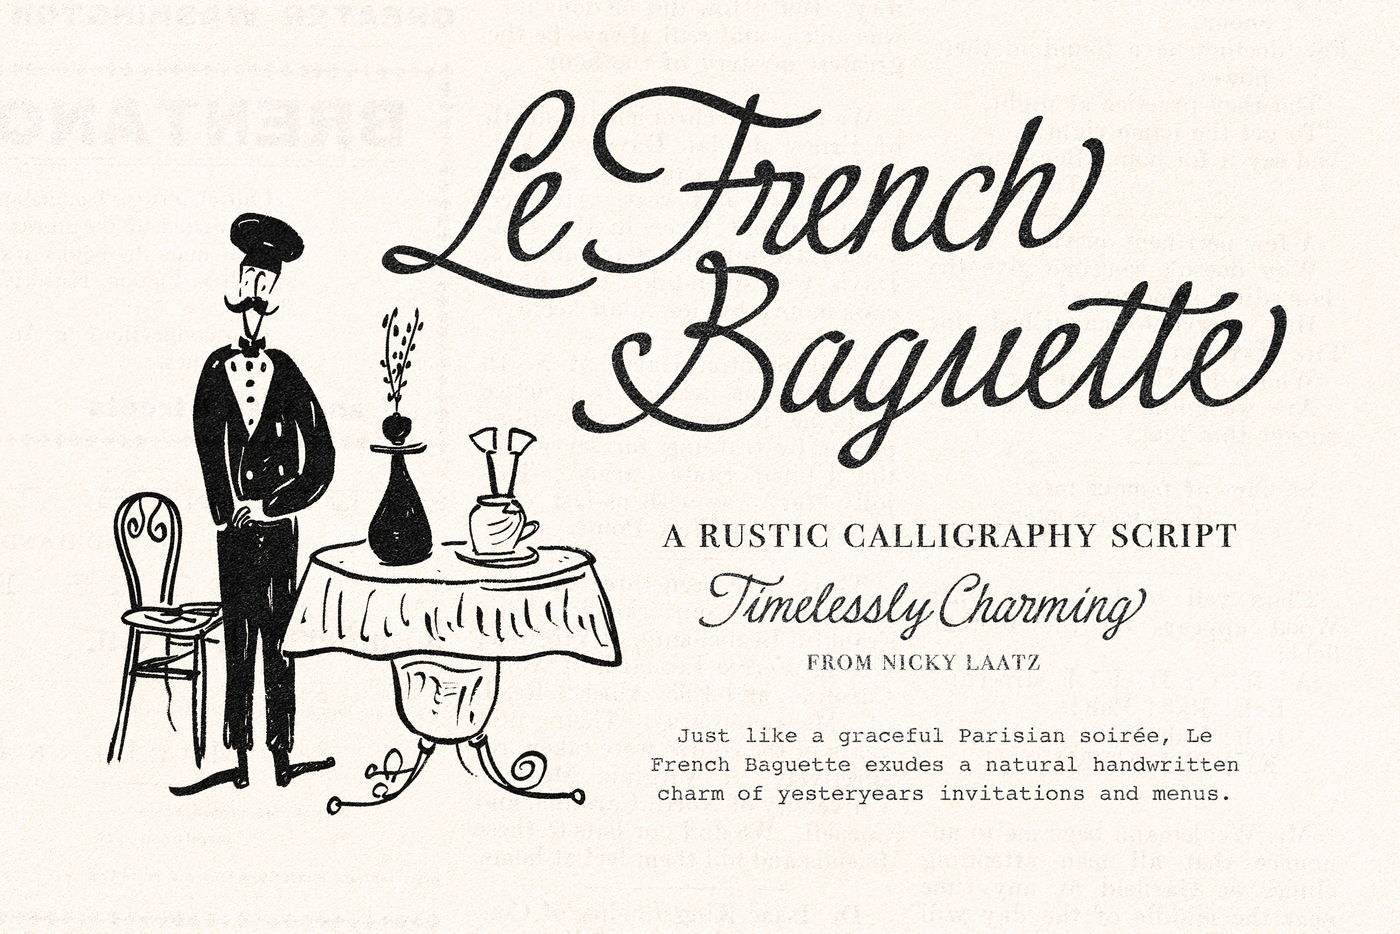 Le French Baguette main product image by Nicky Laatz